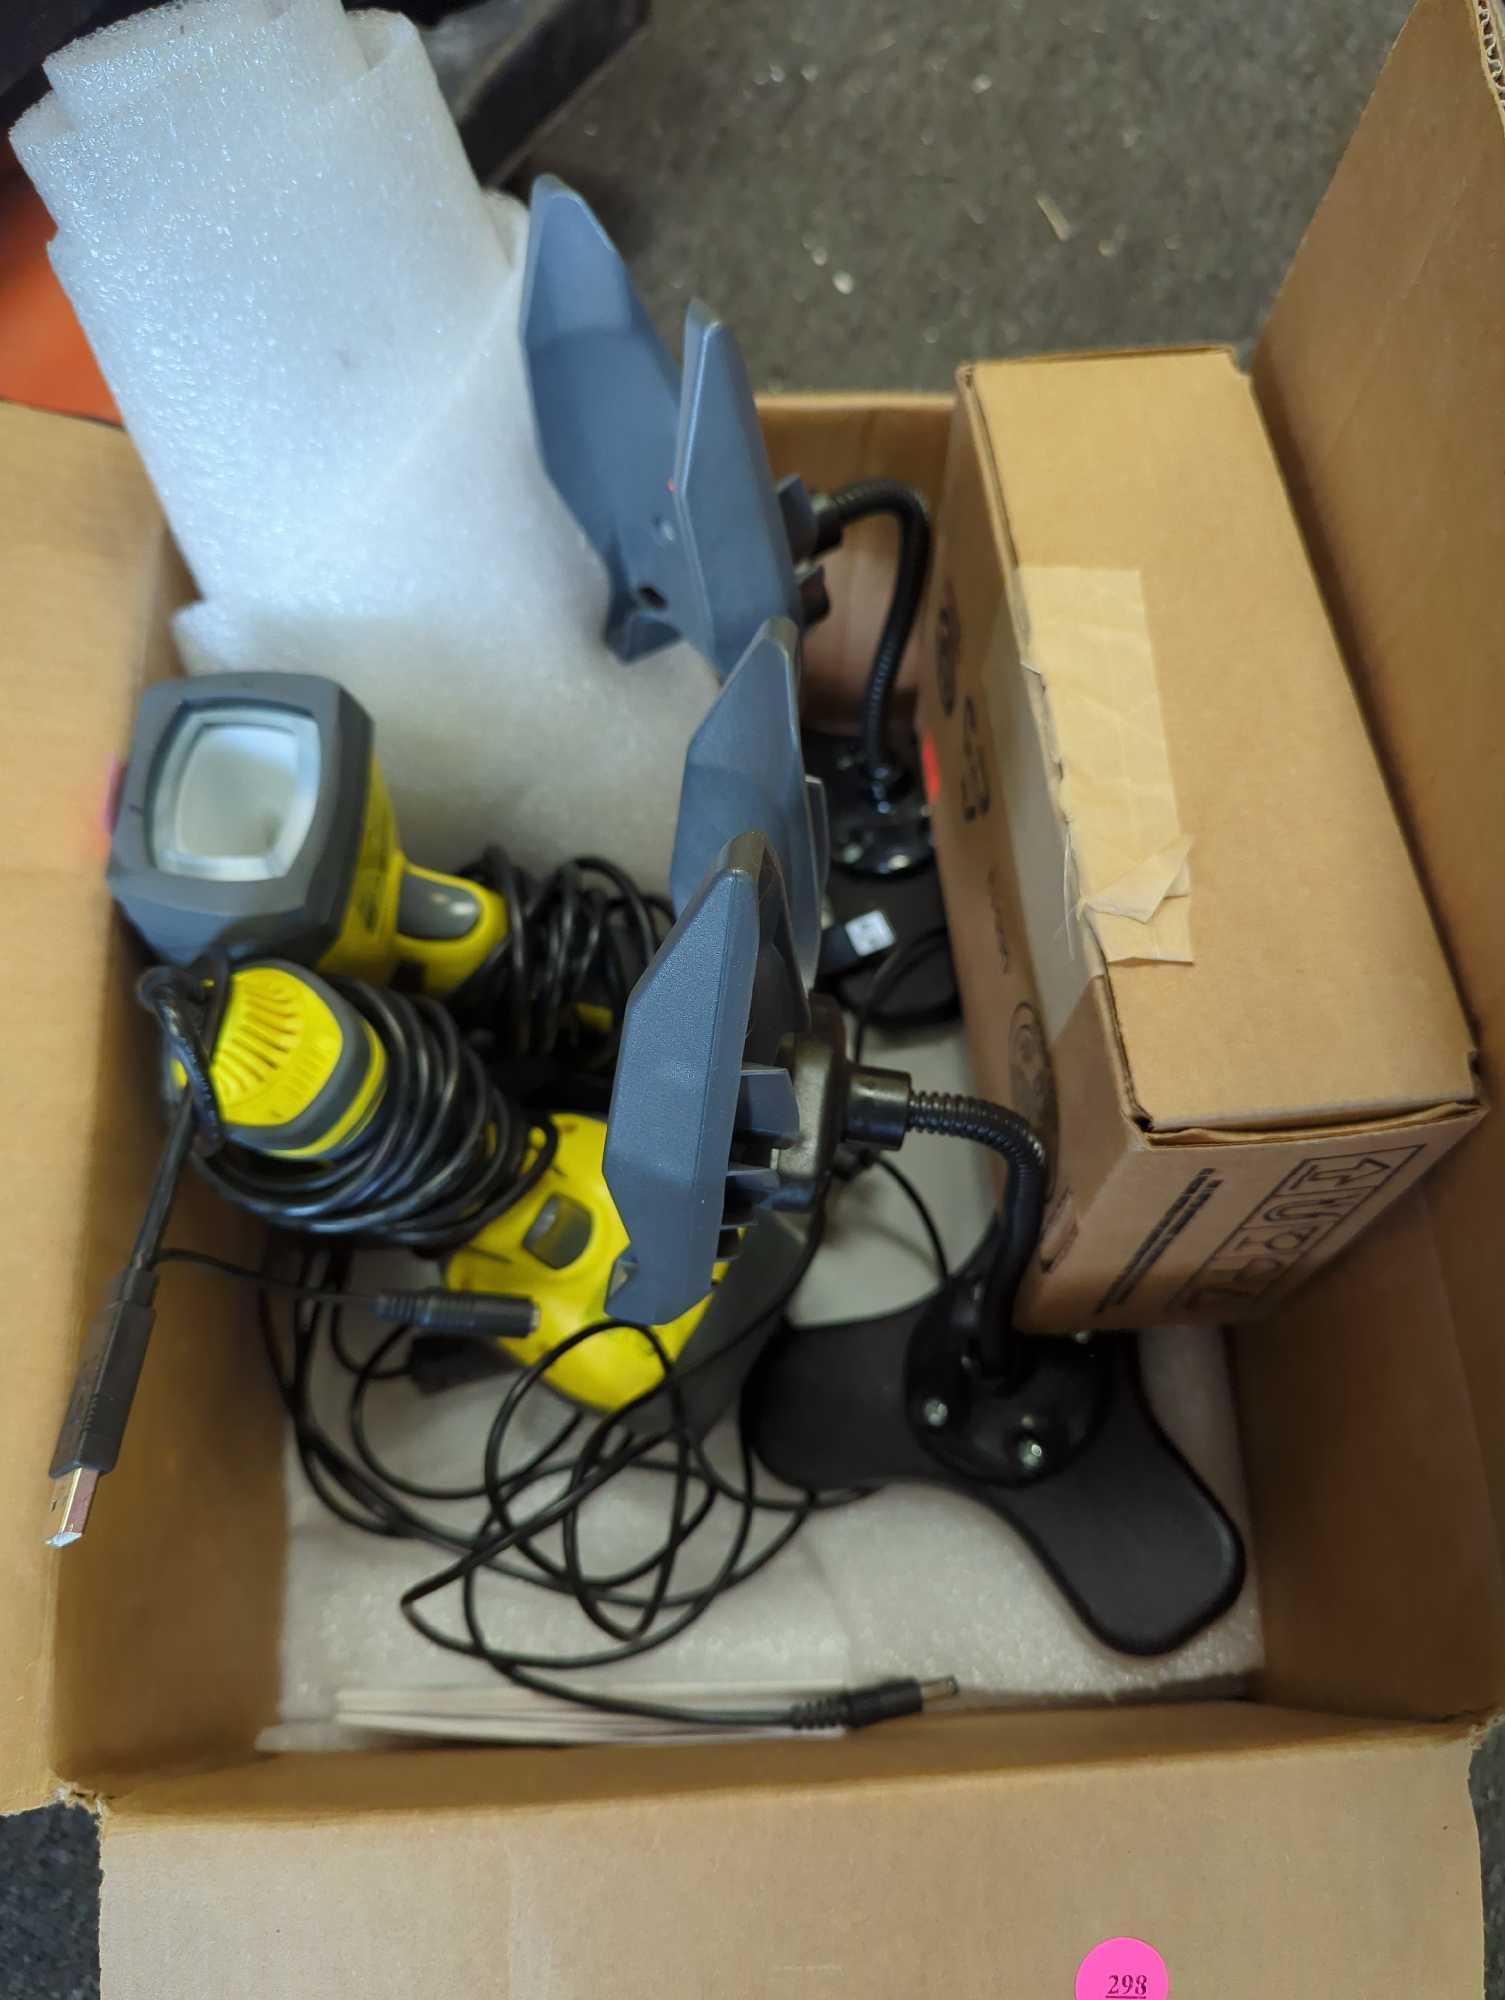 Box Lot of Assorted Items To Include, COGNEX DM8500 DMR-8500 BARCODE SCANNER READER, Barcode Scanner